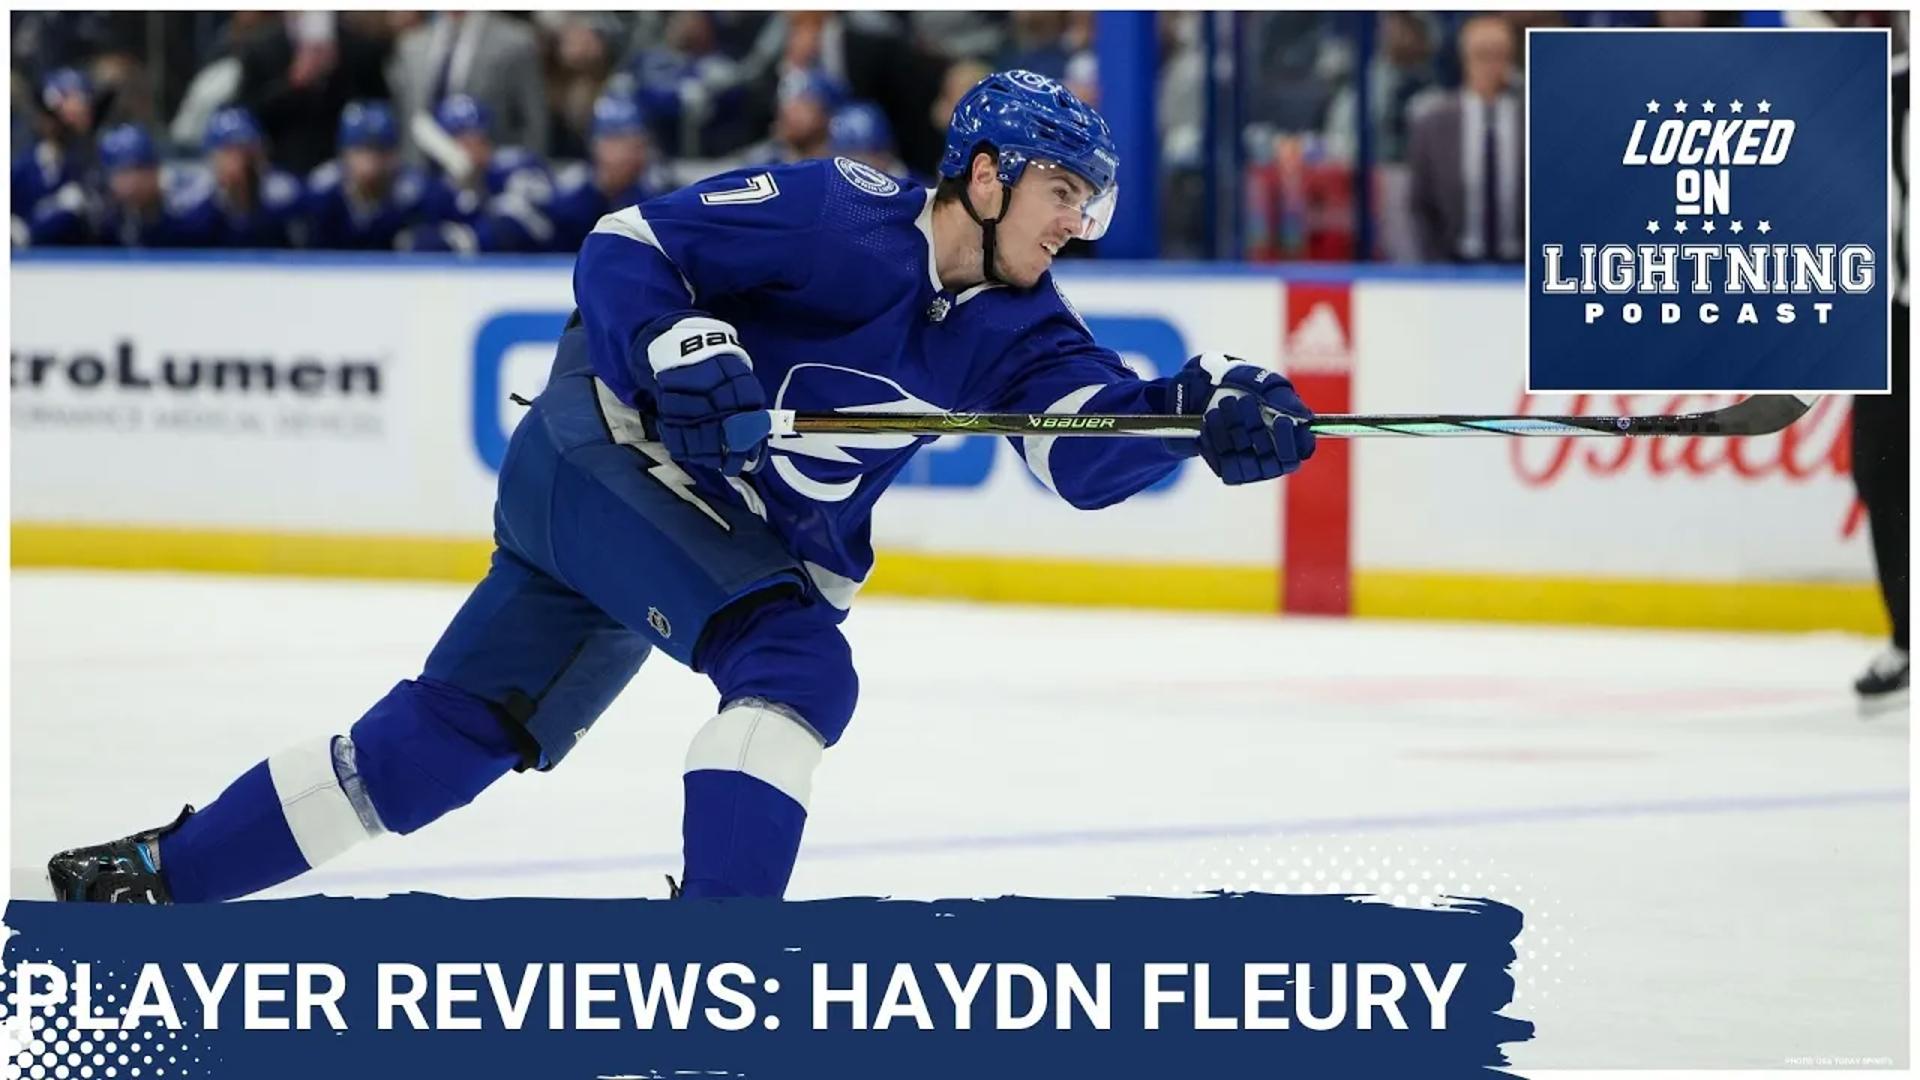 On today's episode, we turn our attention to Haydn Fleury and his brief time in Tampa Bay.